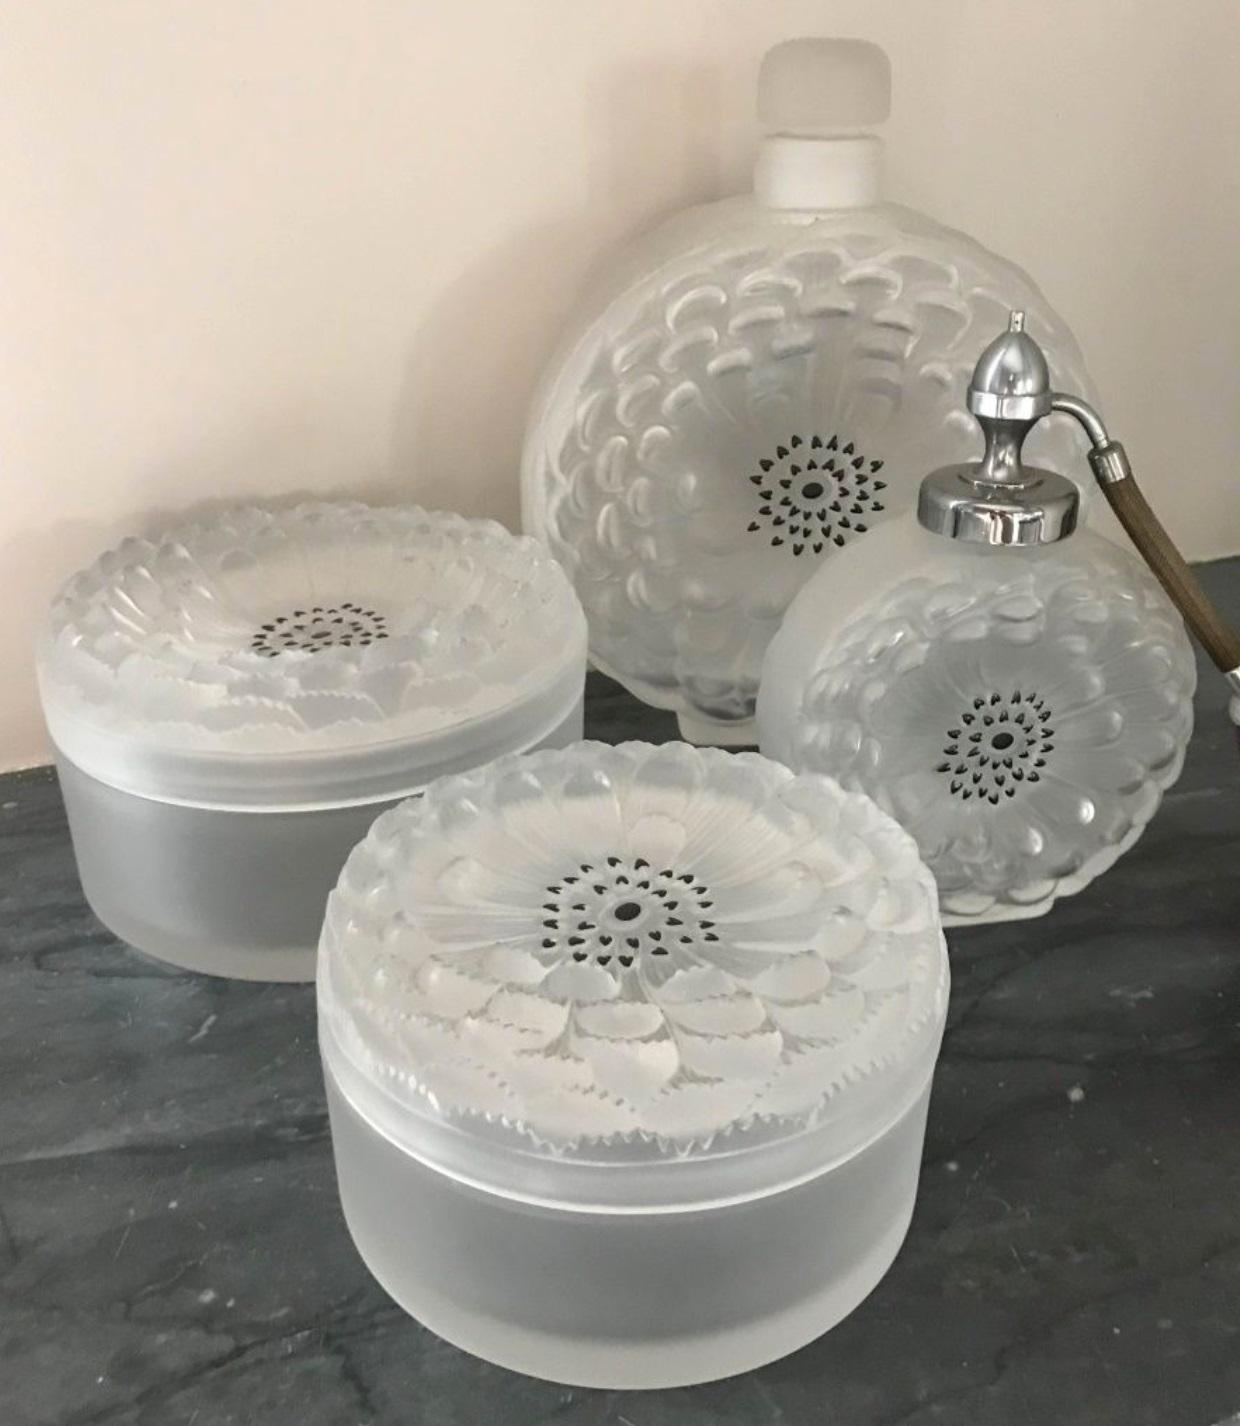 Lalique France, Dahlia.

Toiletries set consisting of two bottles (one covered) and two covered boxes in satin molded pressed glass decorated with Dahlia petals.
1 bottle
1 spray and 2 powder boxes
Signed.
Measure: Height 8.27 in (the biggest